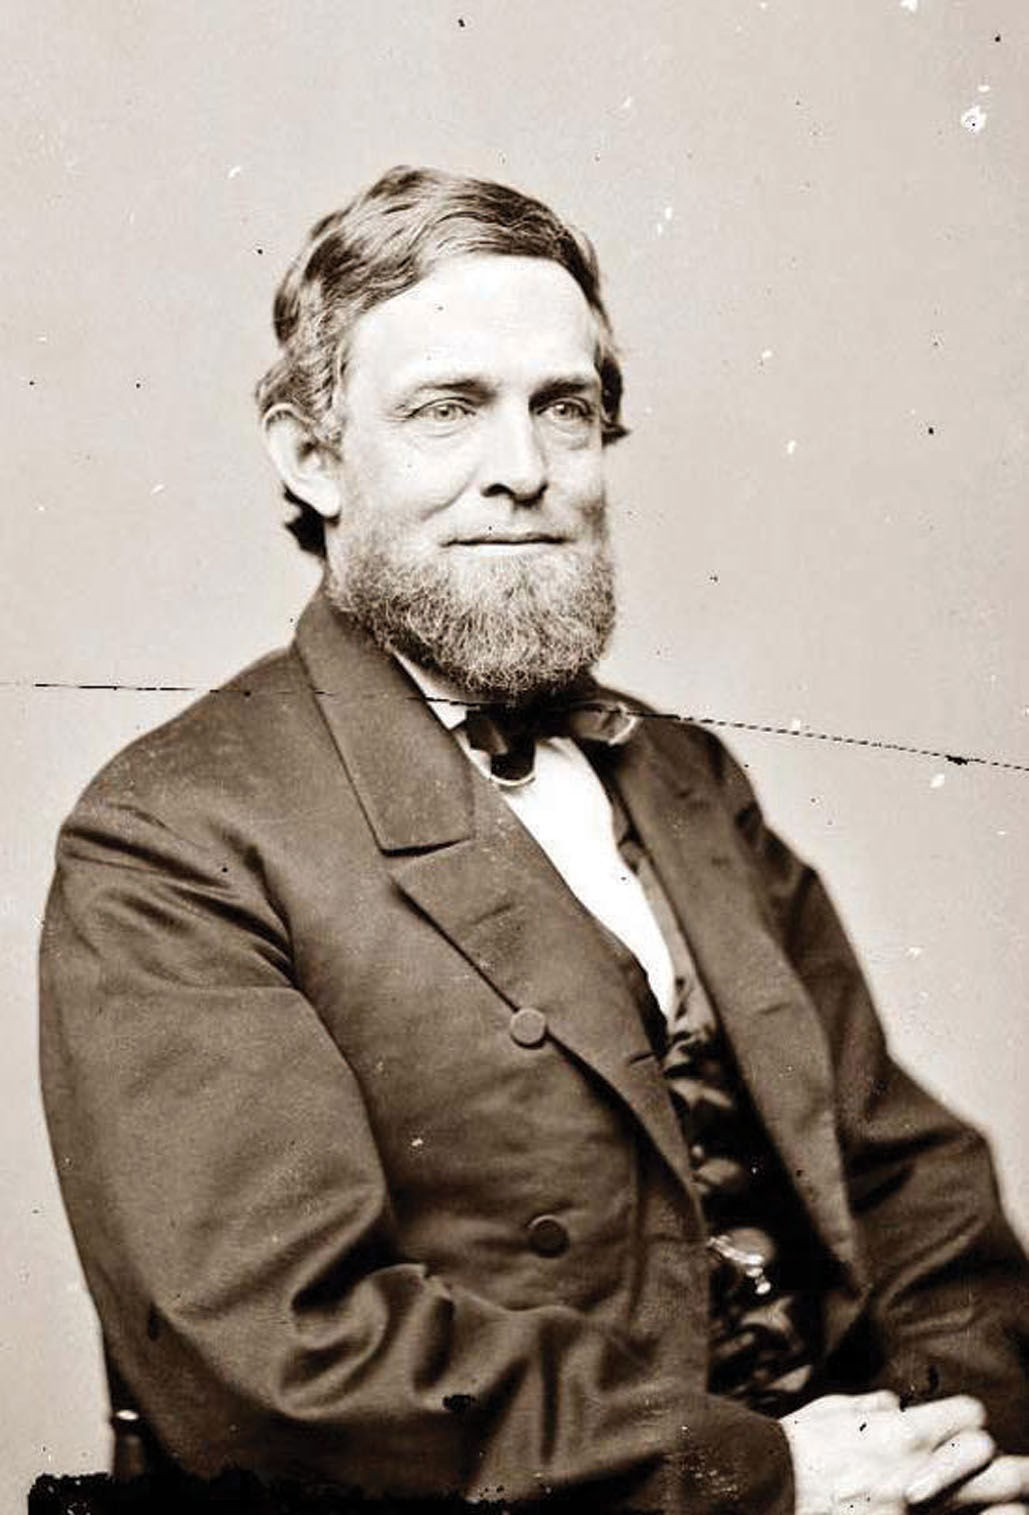 Schuyler Colfax Ulysses S Grant's VP photo c1868 CHOICES 5x7 or request 8x10 or 